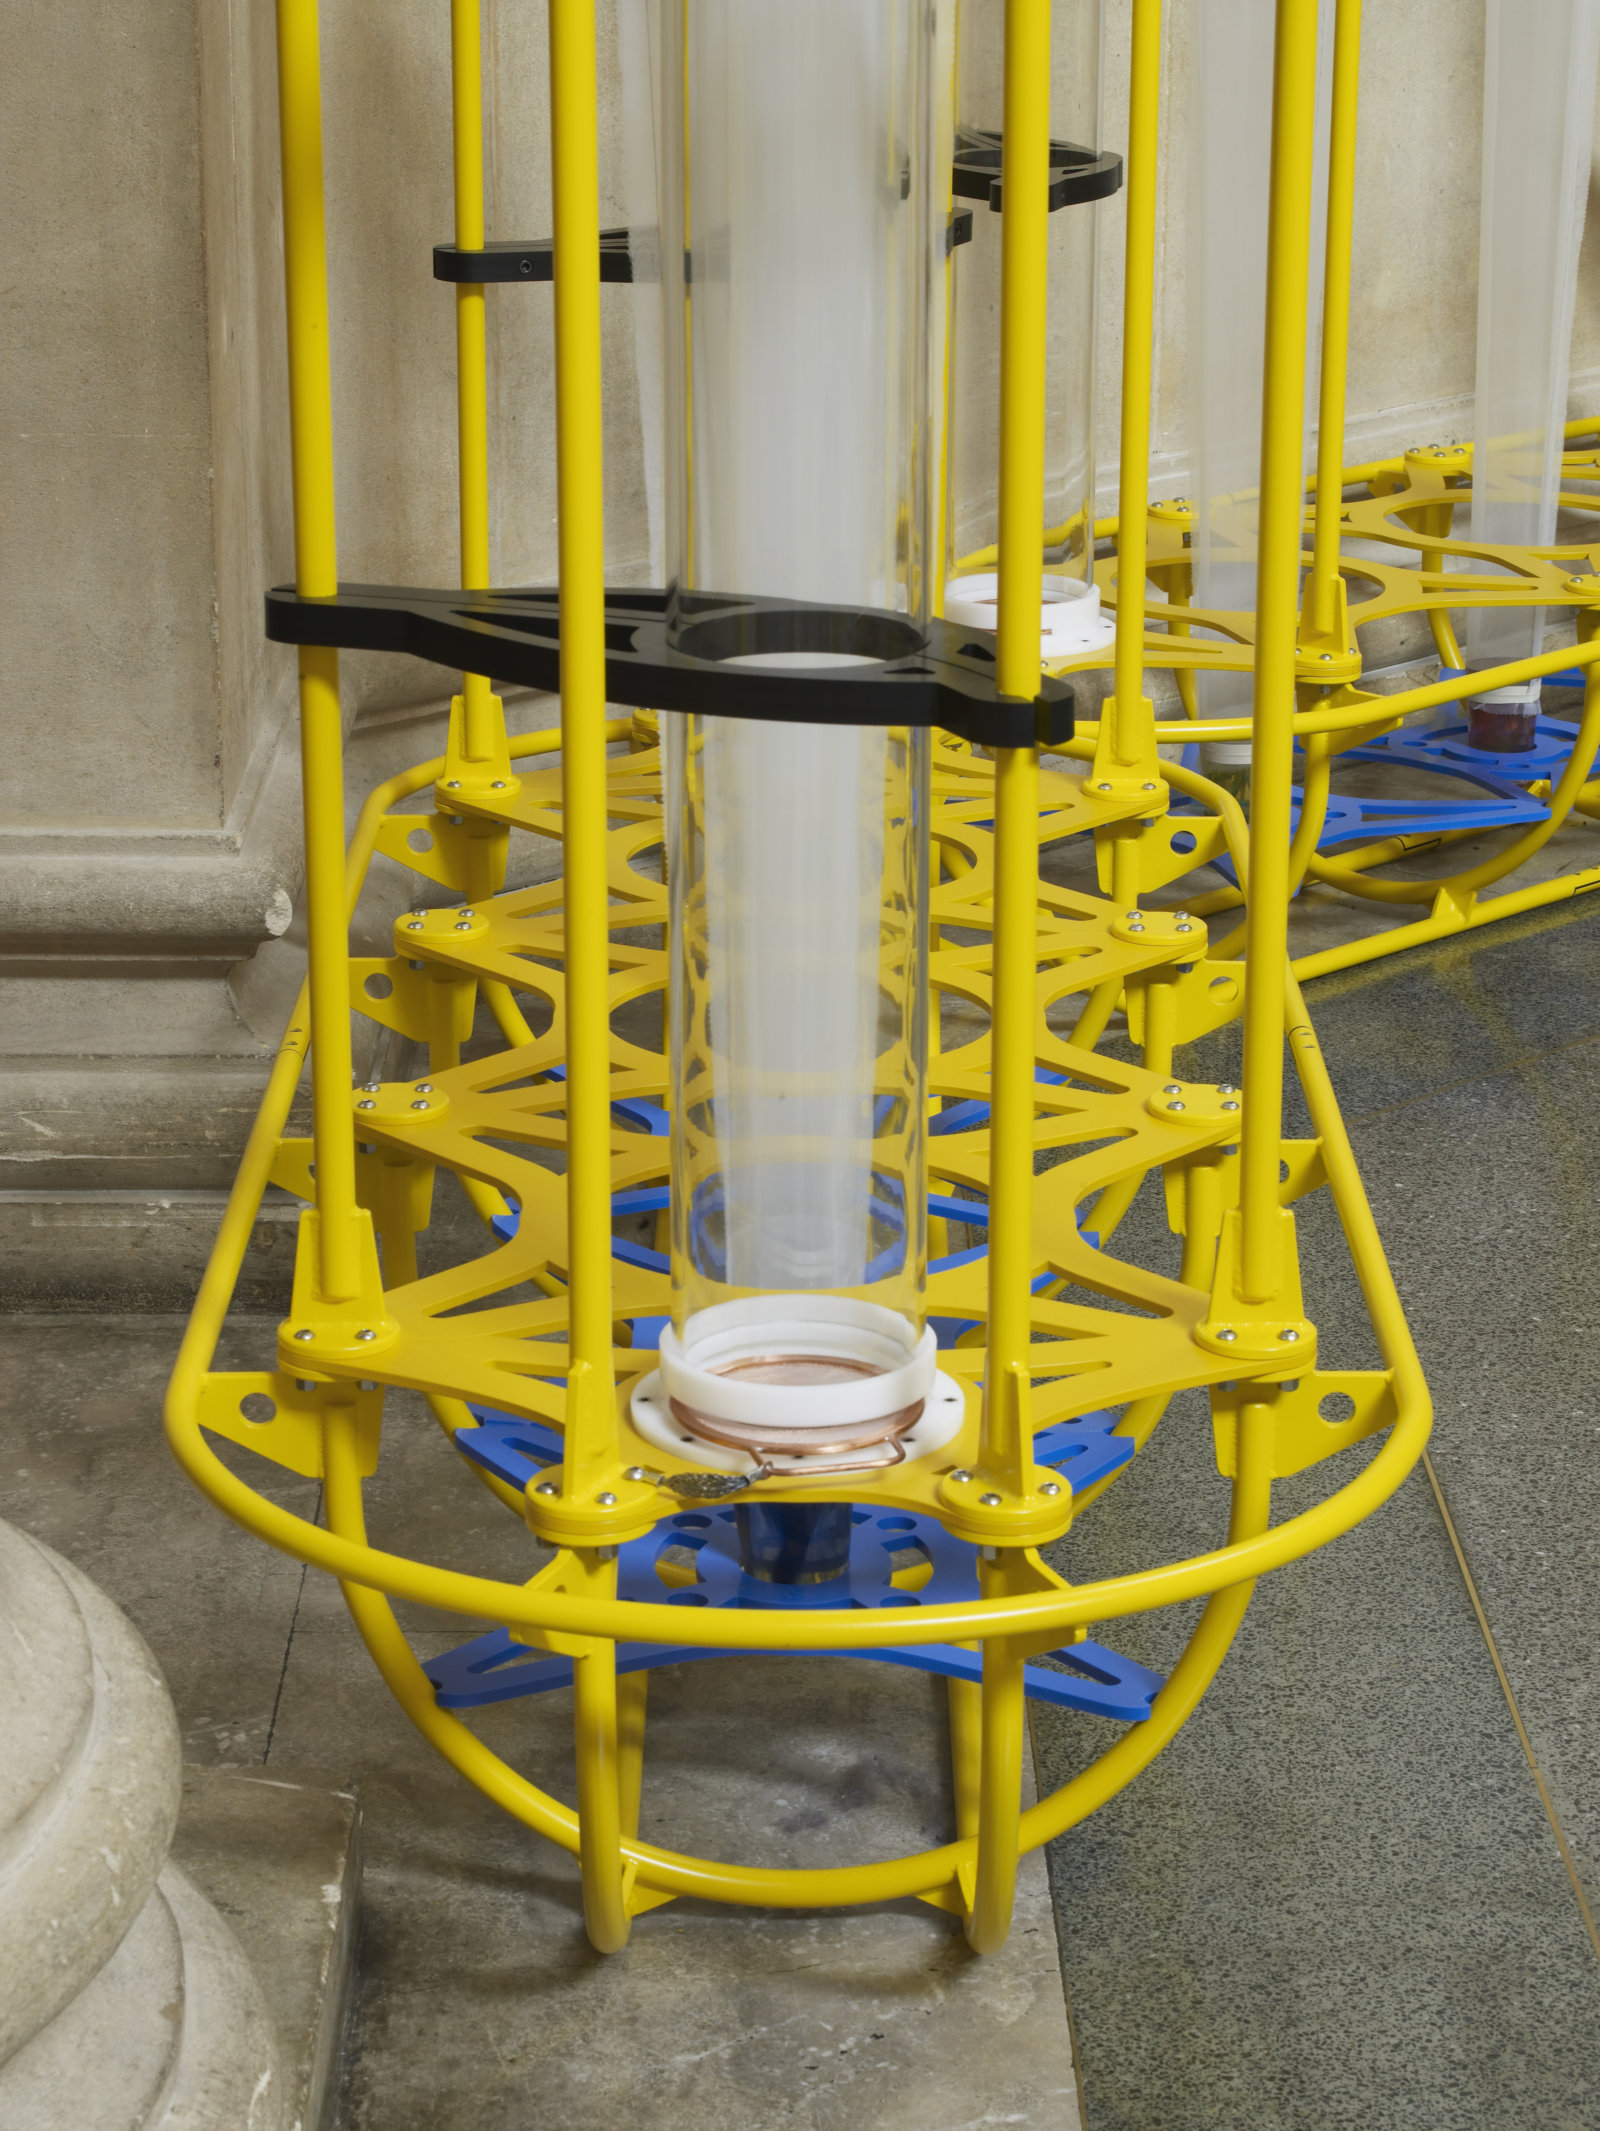 Christina Mackie, The Yellow Machines (detail), 2015, steel, aluminum, acrylic, styrene, copper, stainless steel, nylon webbing, polyethylene, nylon, resin, rubber, 128 x 160 x 32 in. (326 x 406 x 80 cm). Installation view, the filters, Tate Britain, London, UK, 2015